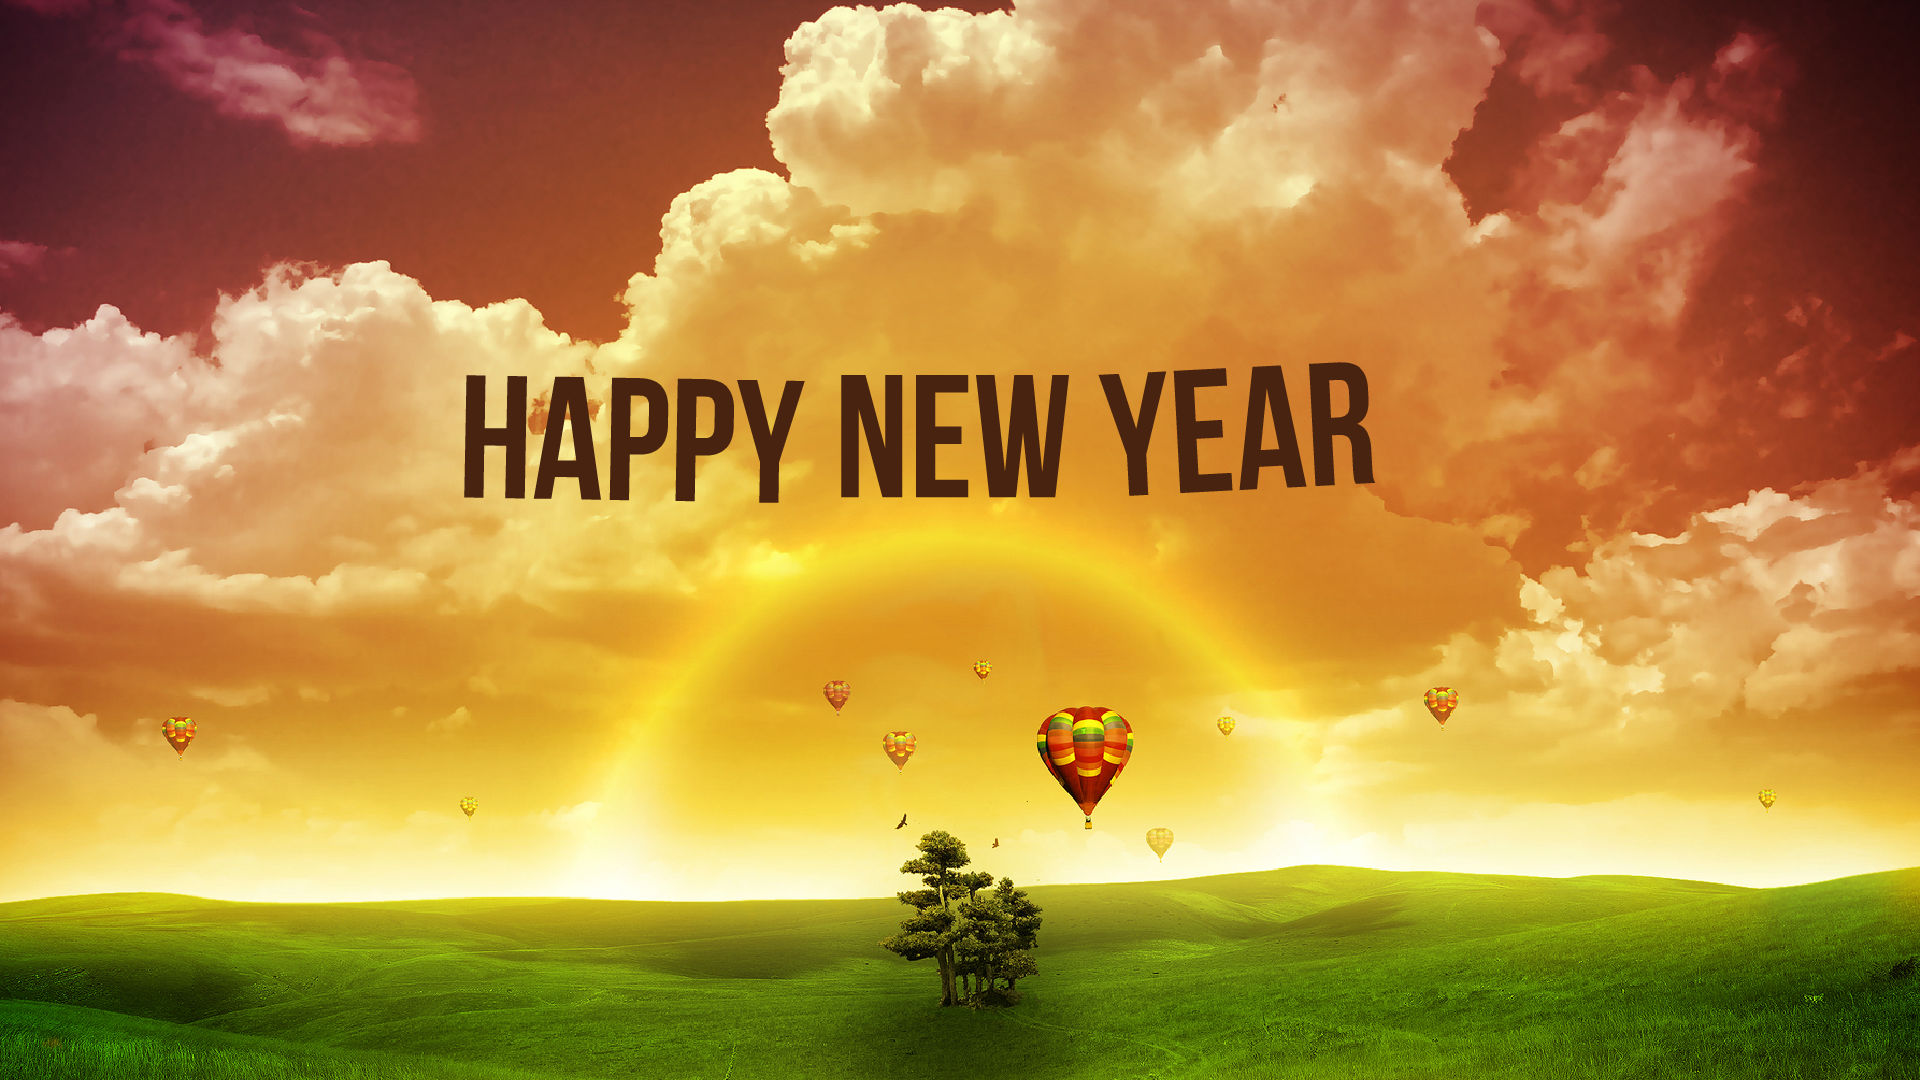 Happy new year 2016 HD wallpapers Images Pictures 1920x1080